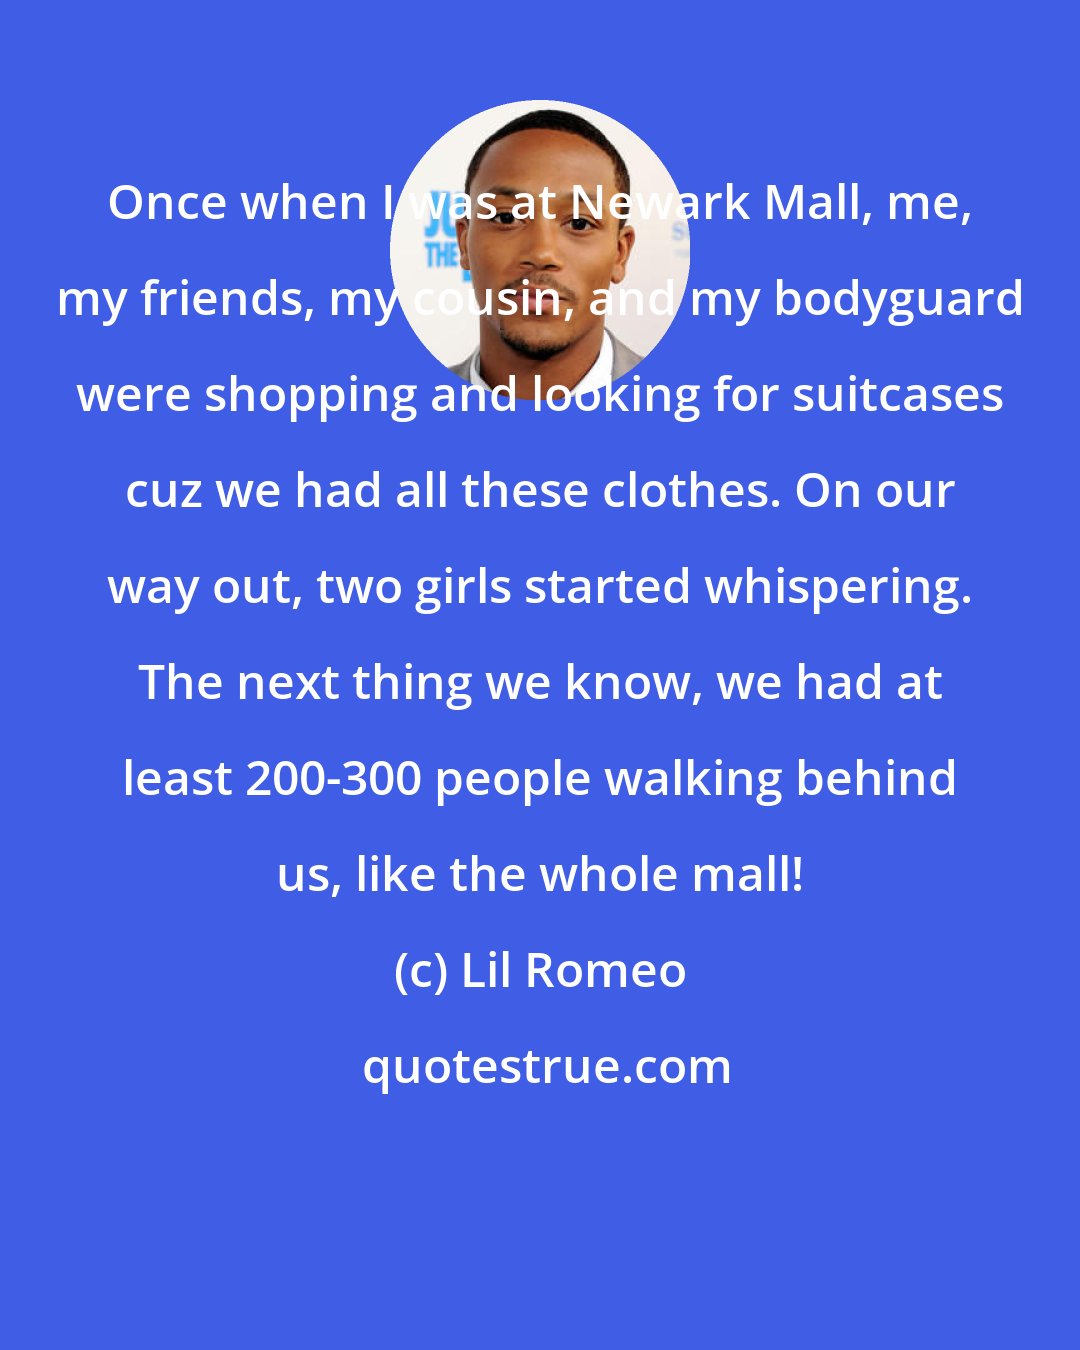 Lil Romeo: Once when I was at Newark Mall, me, my friends, my cousin, and my bodyguard were shopping and looking for suitcases cuz we had all these clothes. On our way out, two girls started whispering. The next thing we know, we had at least 200-300 people walking behind us, like the whole mall!